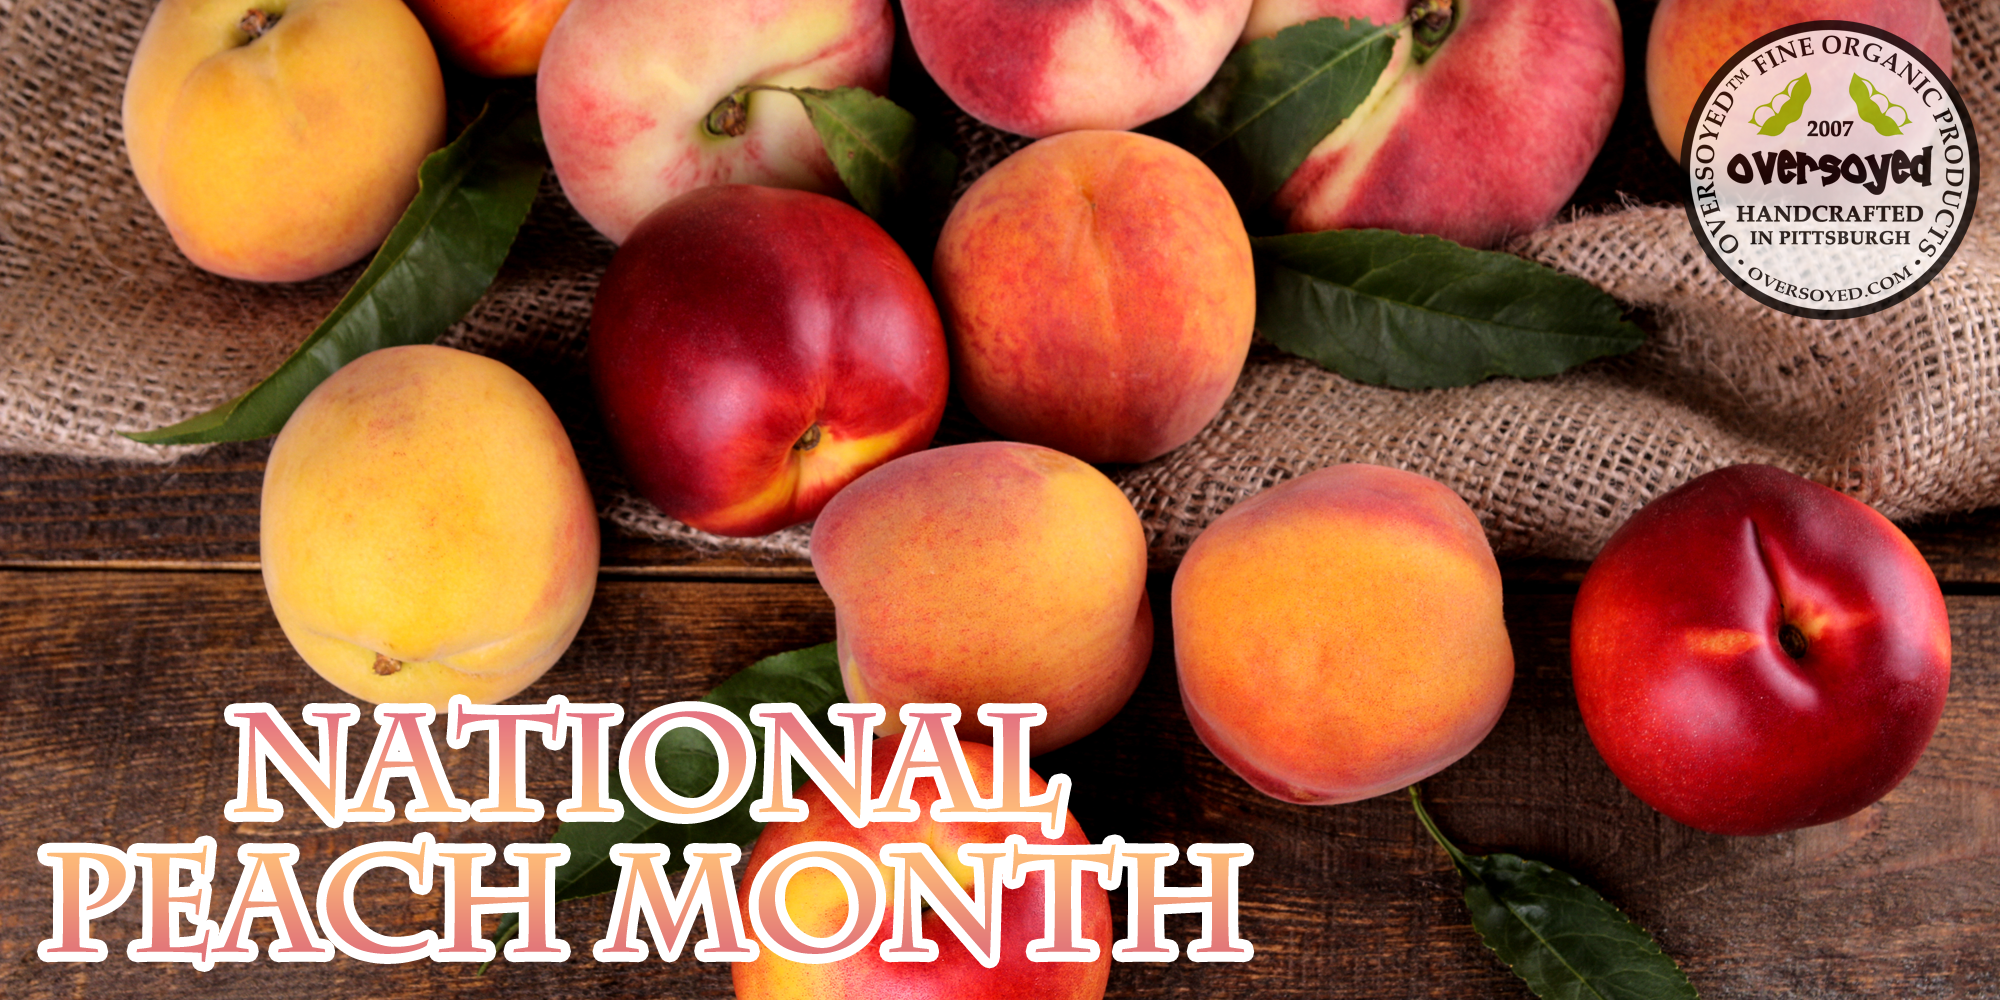 OverSoyed Fine Organic Products - National Peach Month